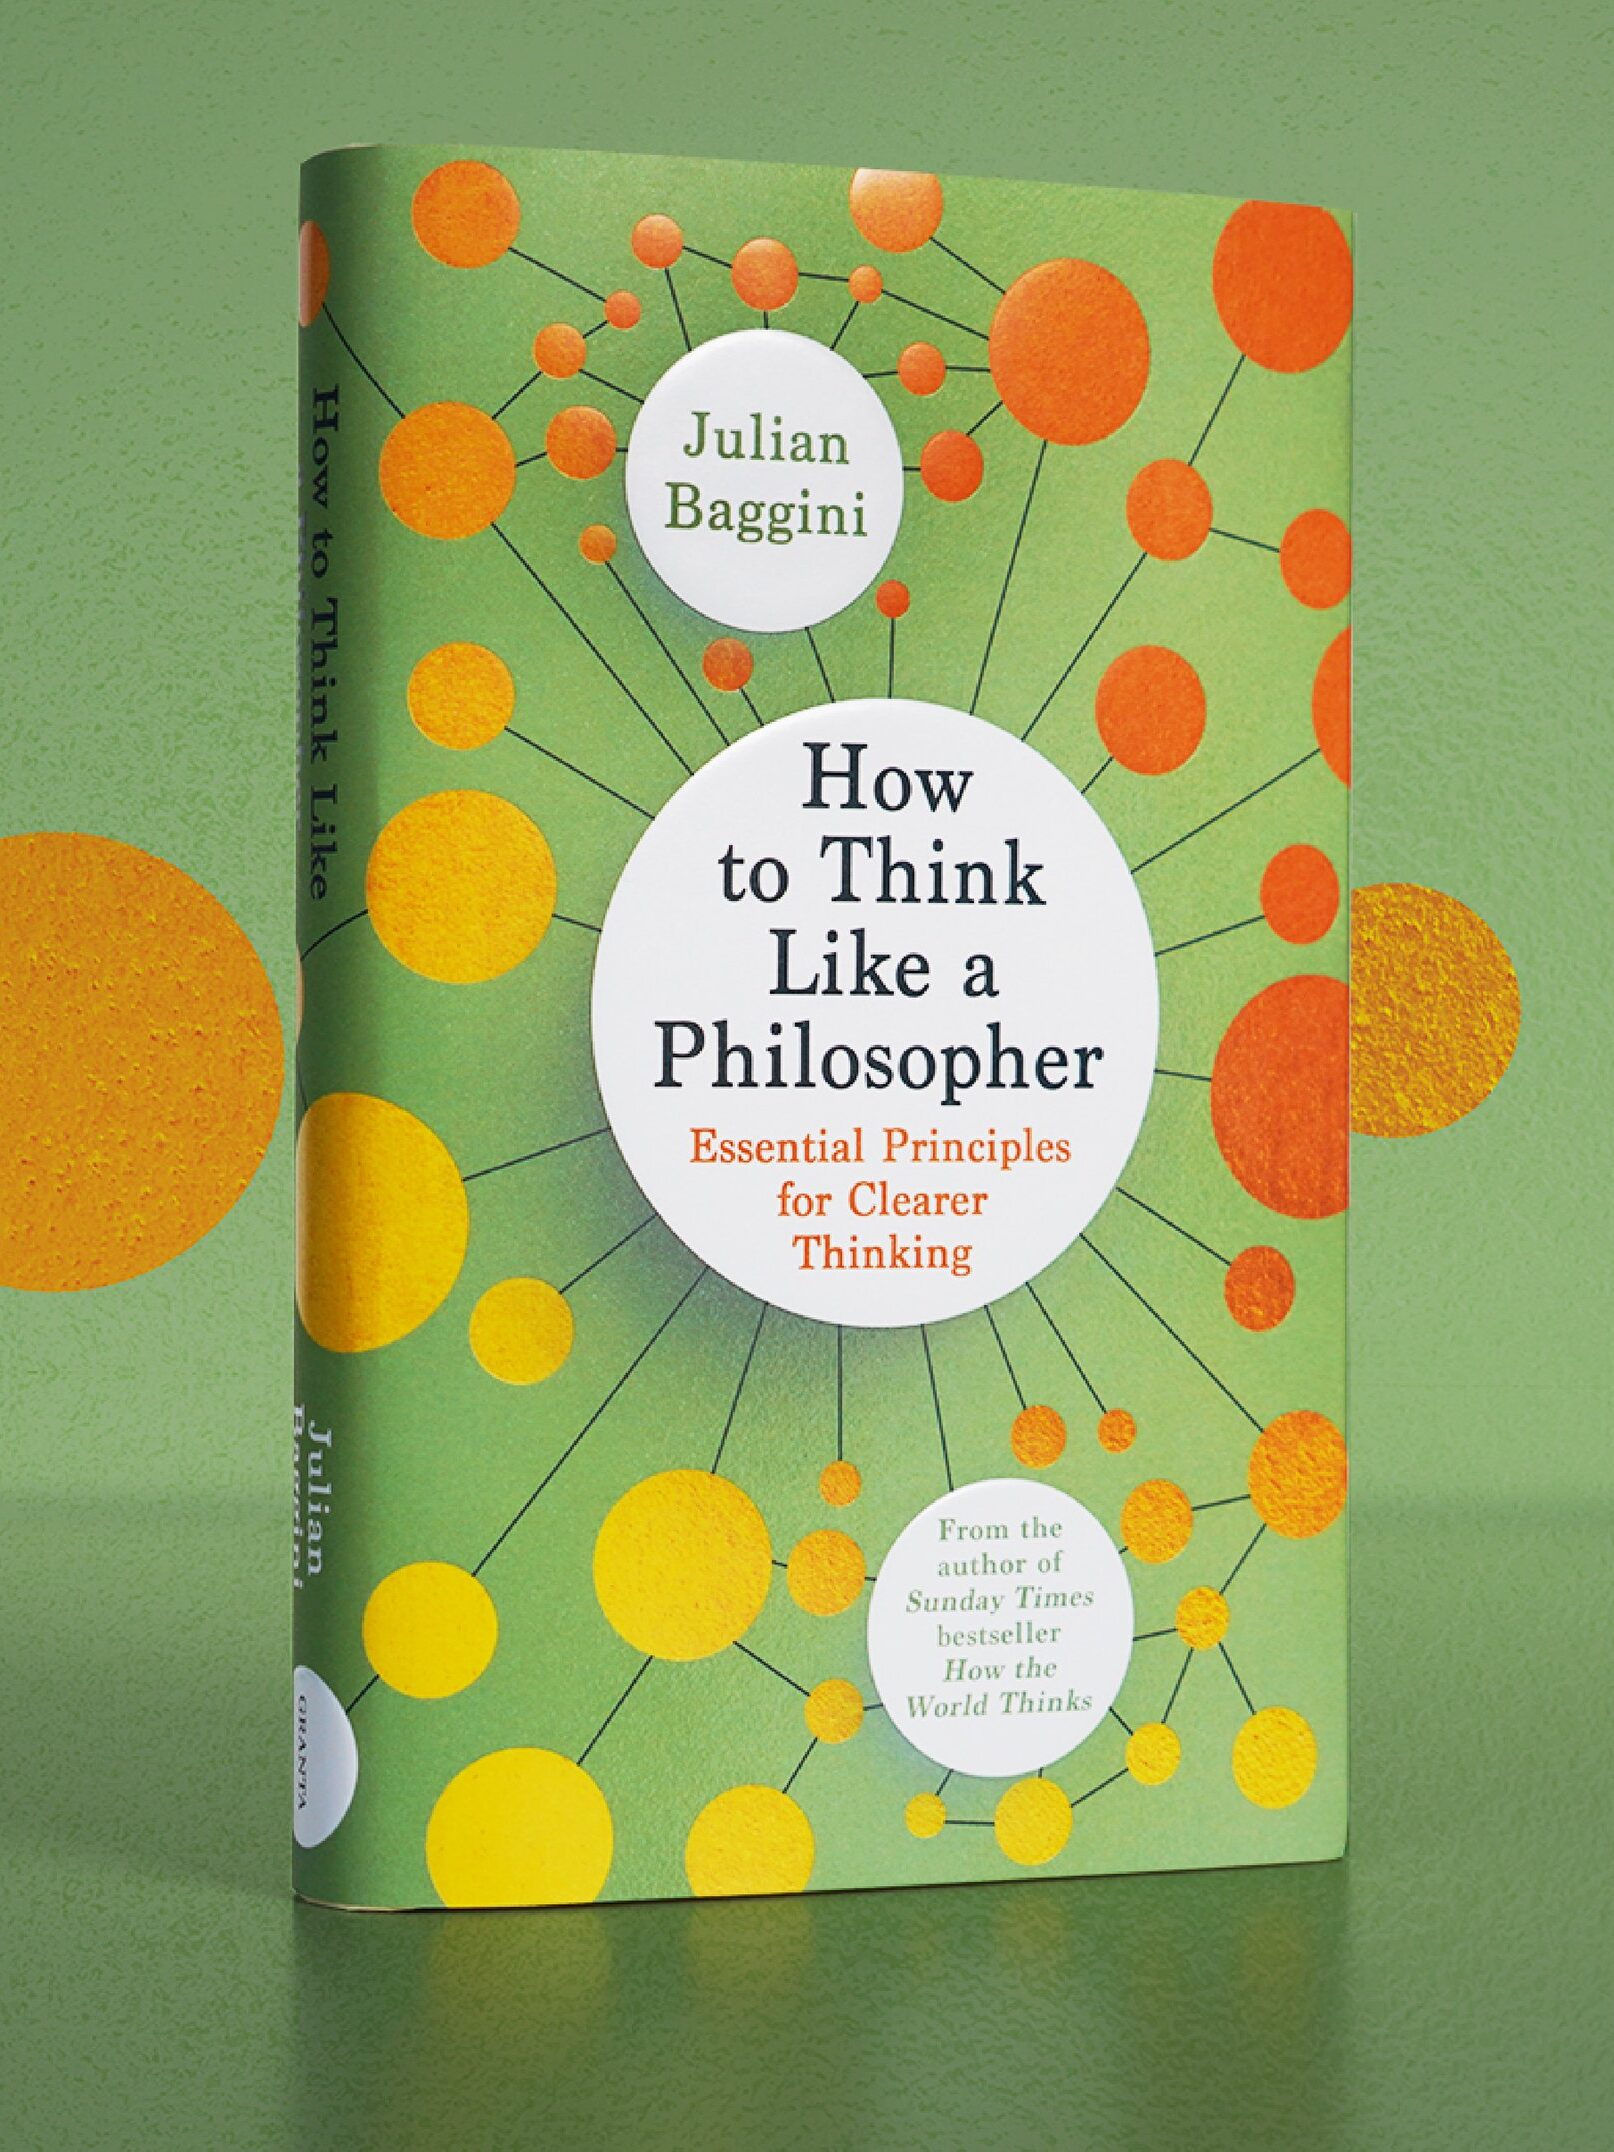 The book "How to Think Like a Philosopher" with a green background. Found on Hive.